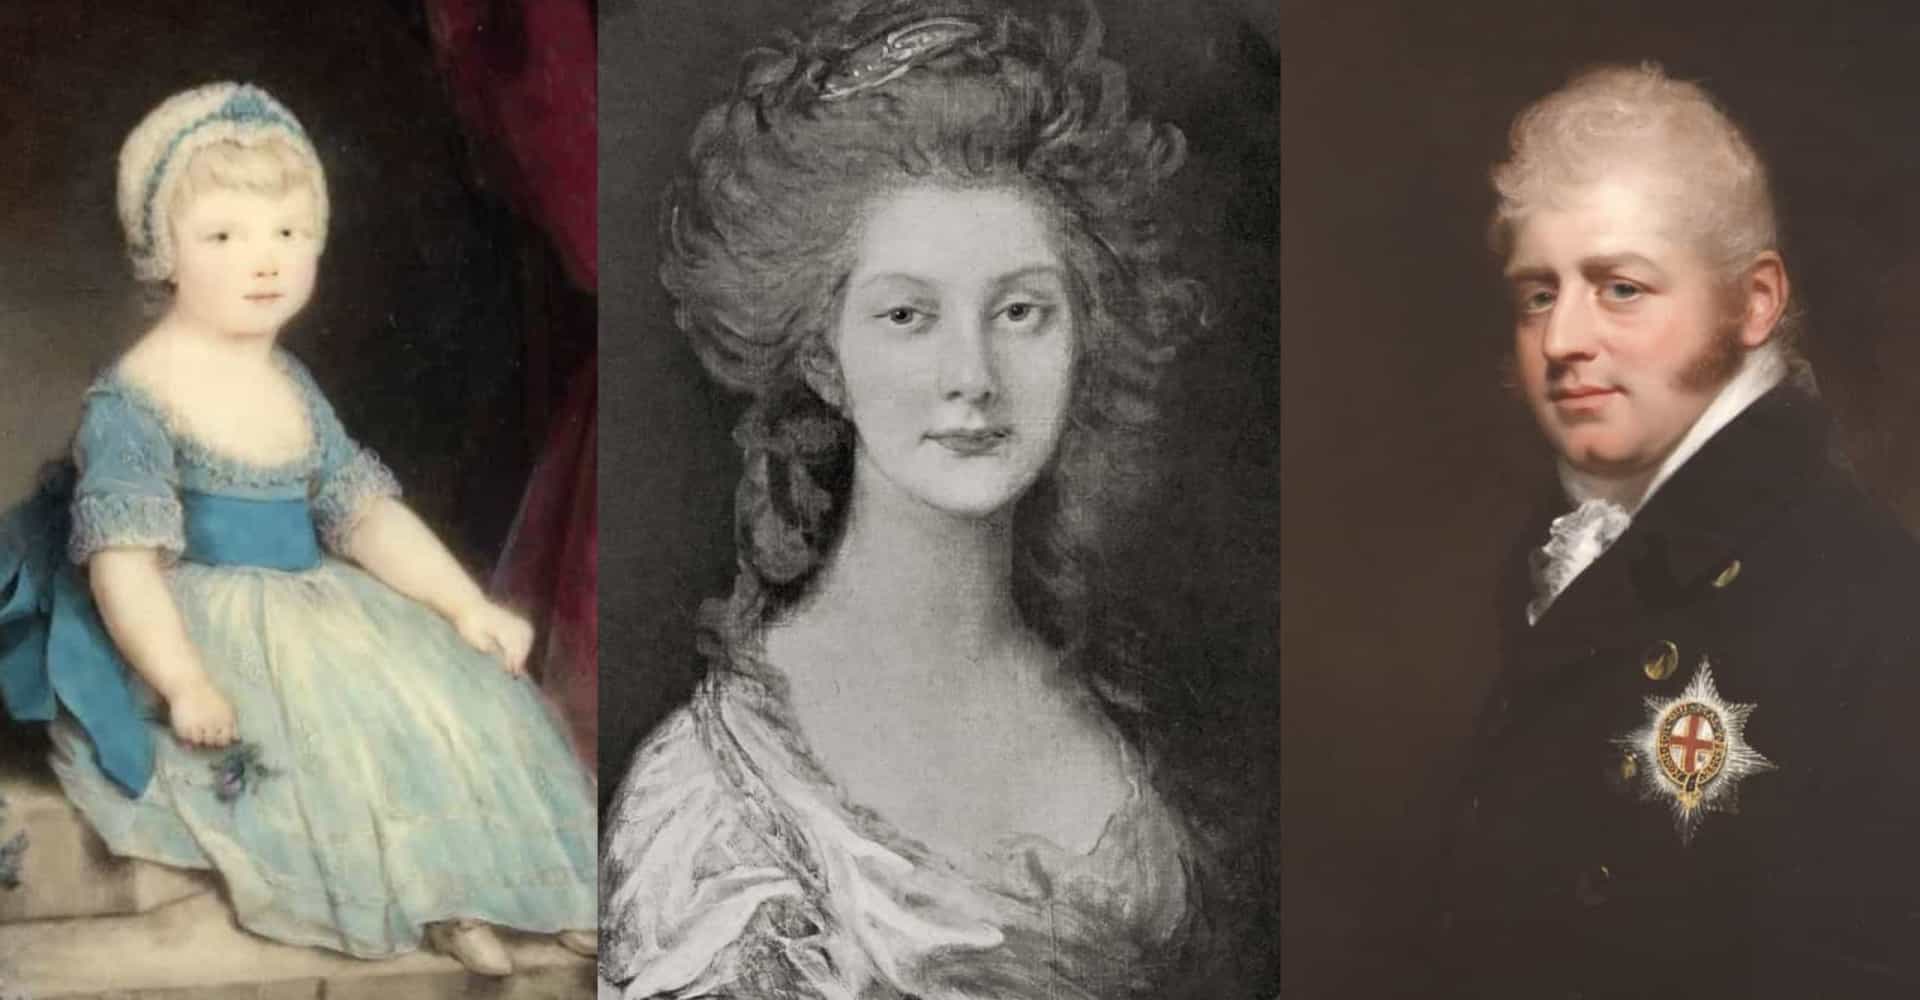 <p>Sure, families were a lot bigger back then, but King George III and Queen Charlotte really went for it and had 15 children! These men and women ended up shaping the British monarchy, and a few tried to steer the <a href="https://www.starsinsider.com/lifestyle/450359/the-royal-weddings-that-changed-european-history" rel="noopener">British royal family</a> in different directions. Some even became kings themselves.</p><p>From the moment George III's first child was born, in 1762, to when the last one died, in 1857, in this gallery you'll learn all about who his 15 children were, and their contributions to history. Click on for more.</p><p>You may also like: <a href="https://www.starsinsider.com/n/145704?utm_source=msn.com&utm_medium=display&utm_campaign=referral_description&utm_content=498721v1en-ca">Creepy! Celebrities who have doppelgangers from the past</a></p>